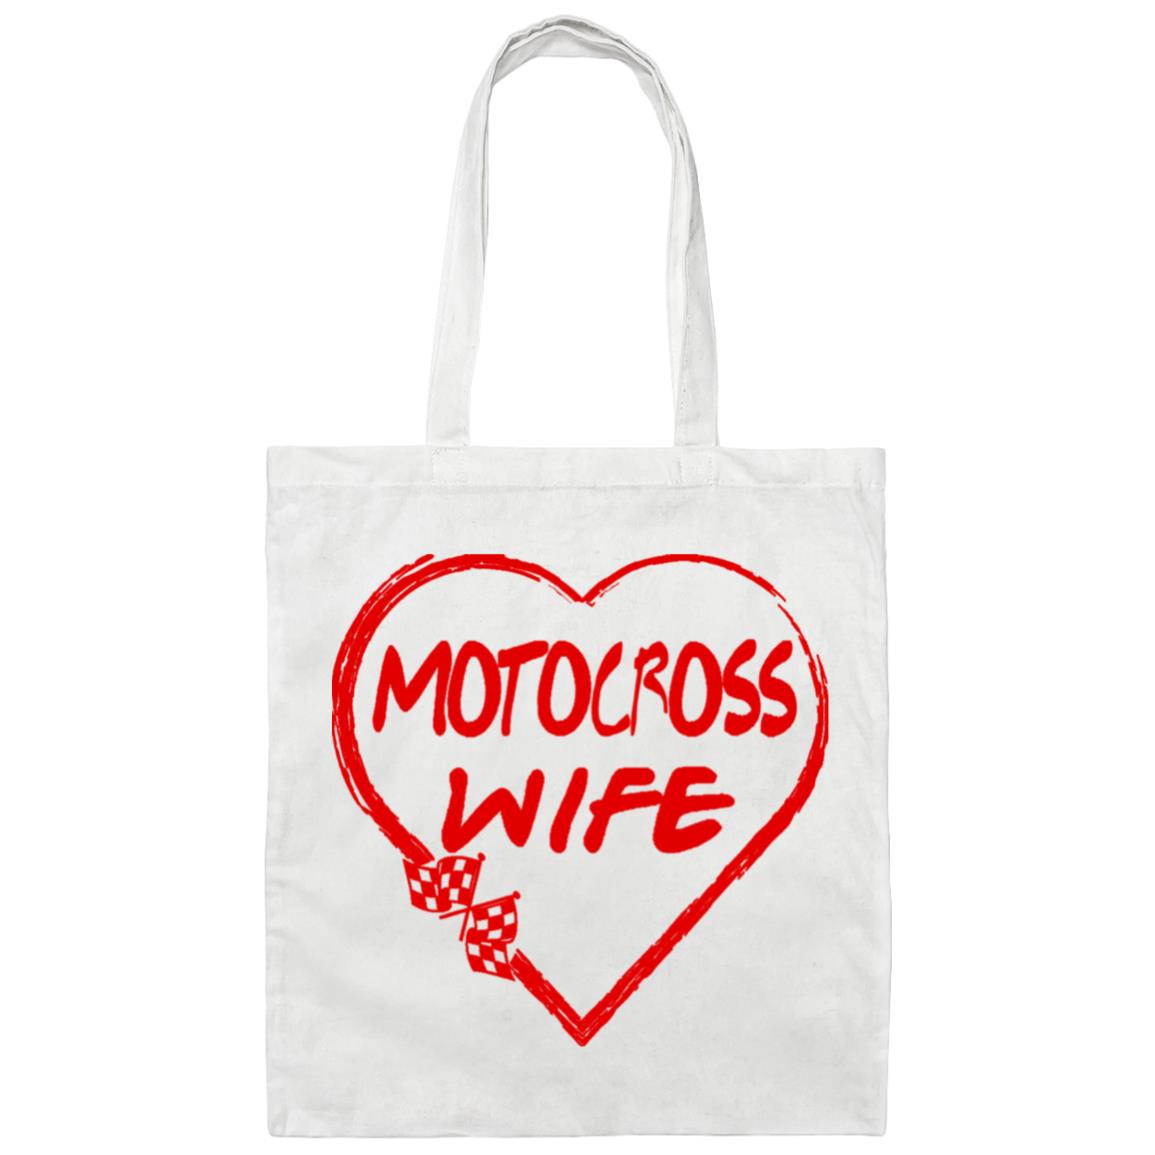 Motocross Wife Canvas Tote Bag